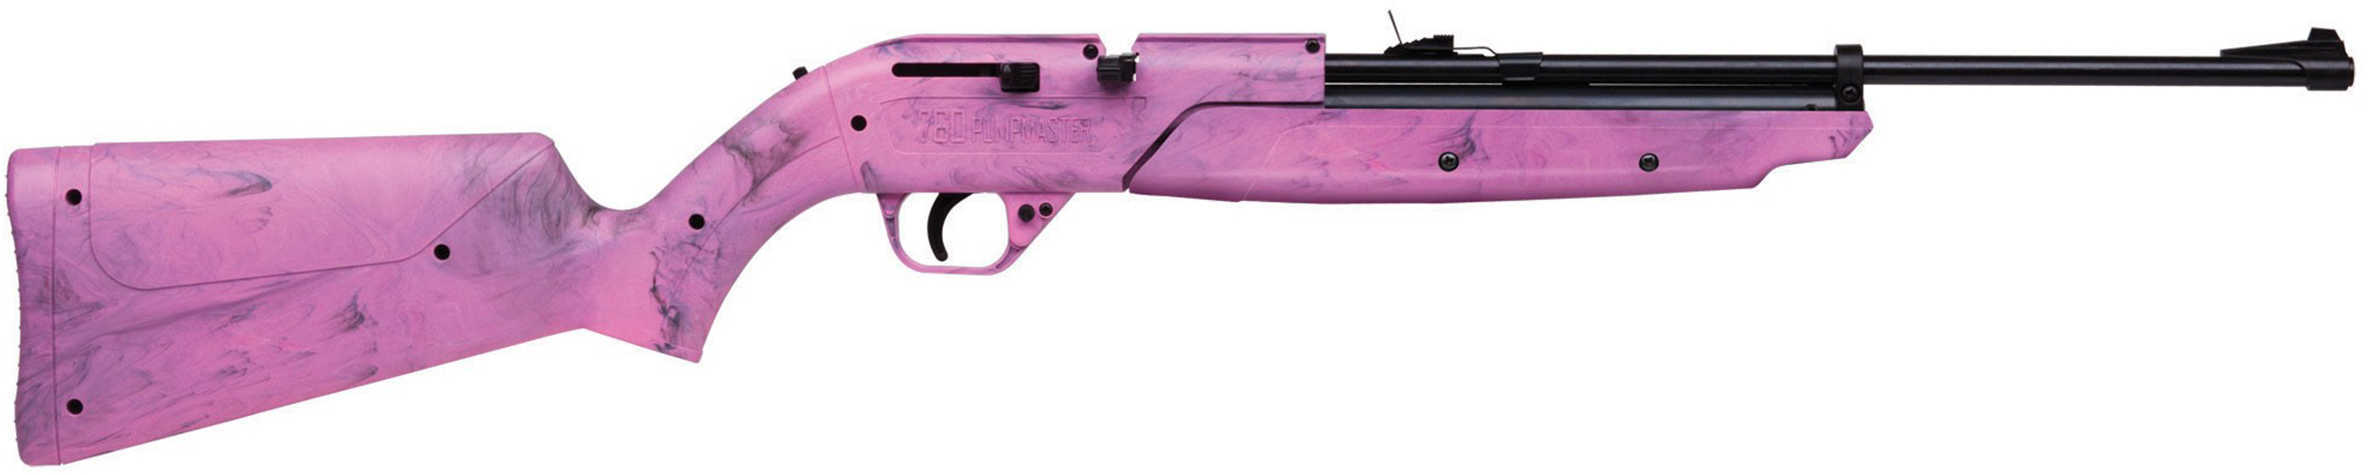 Crosman .177 Bb Pump Rifle With Pink Synthetic Stock Md: 760p